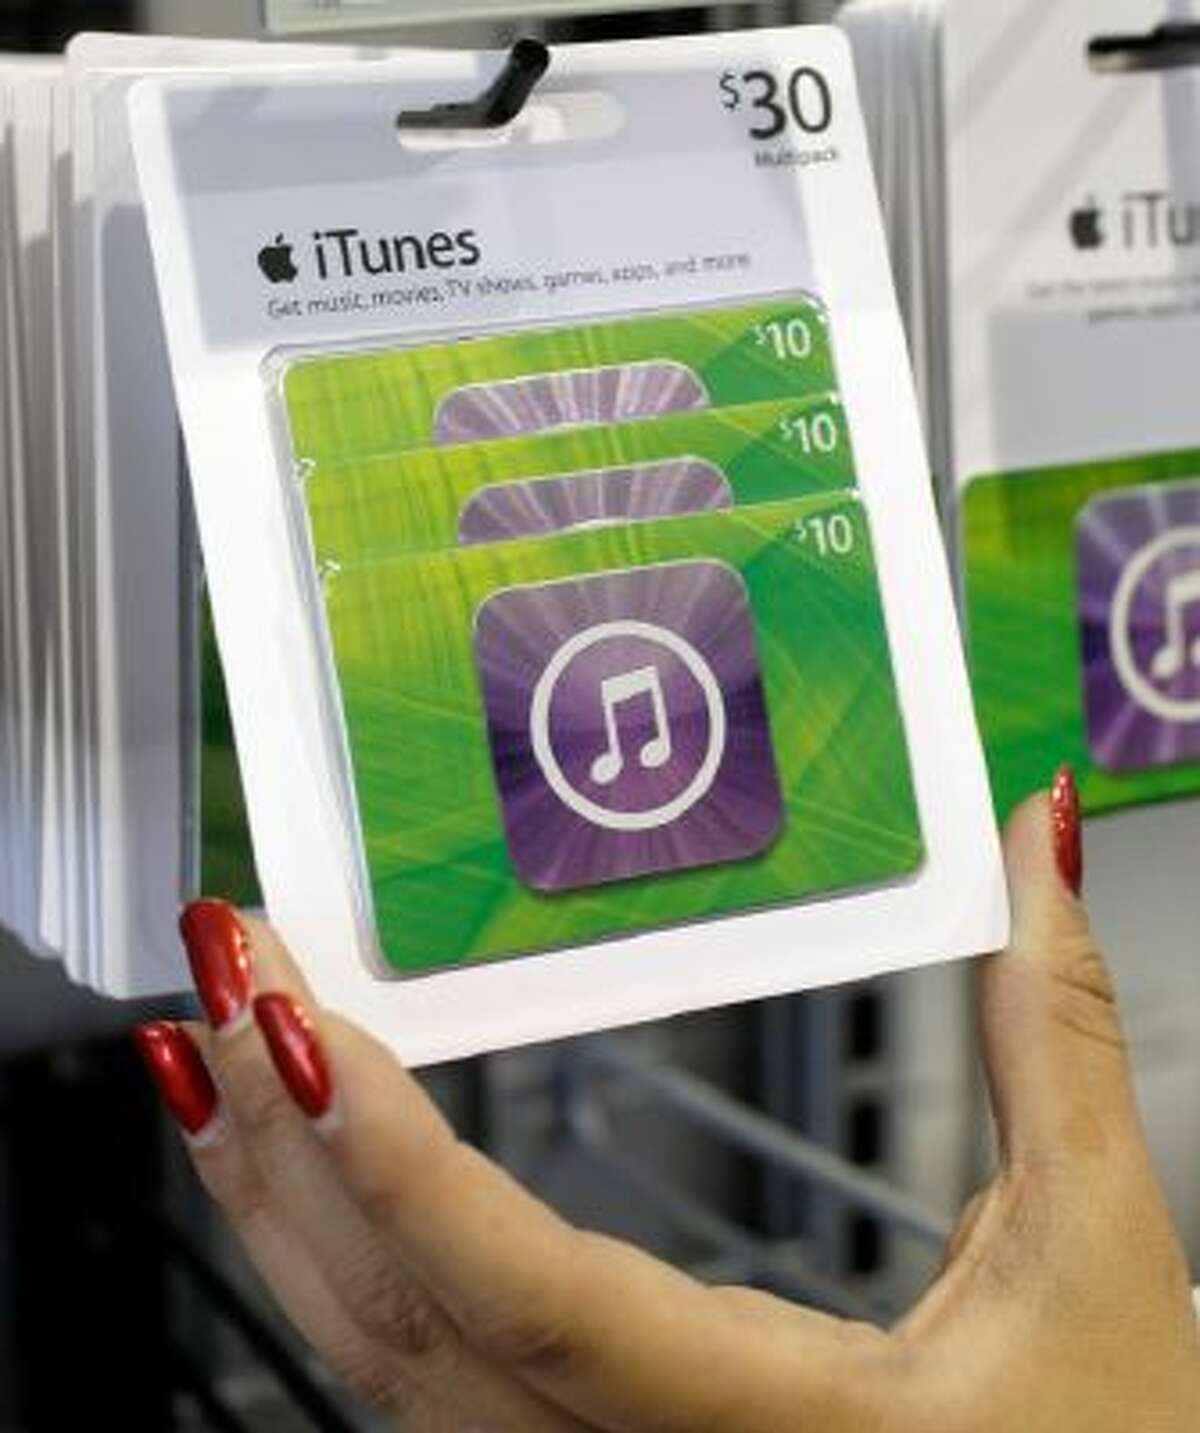 Customer picks up an Apple iTunes gift card on display at a Best Buy in Mountain View, Calif.